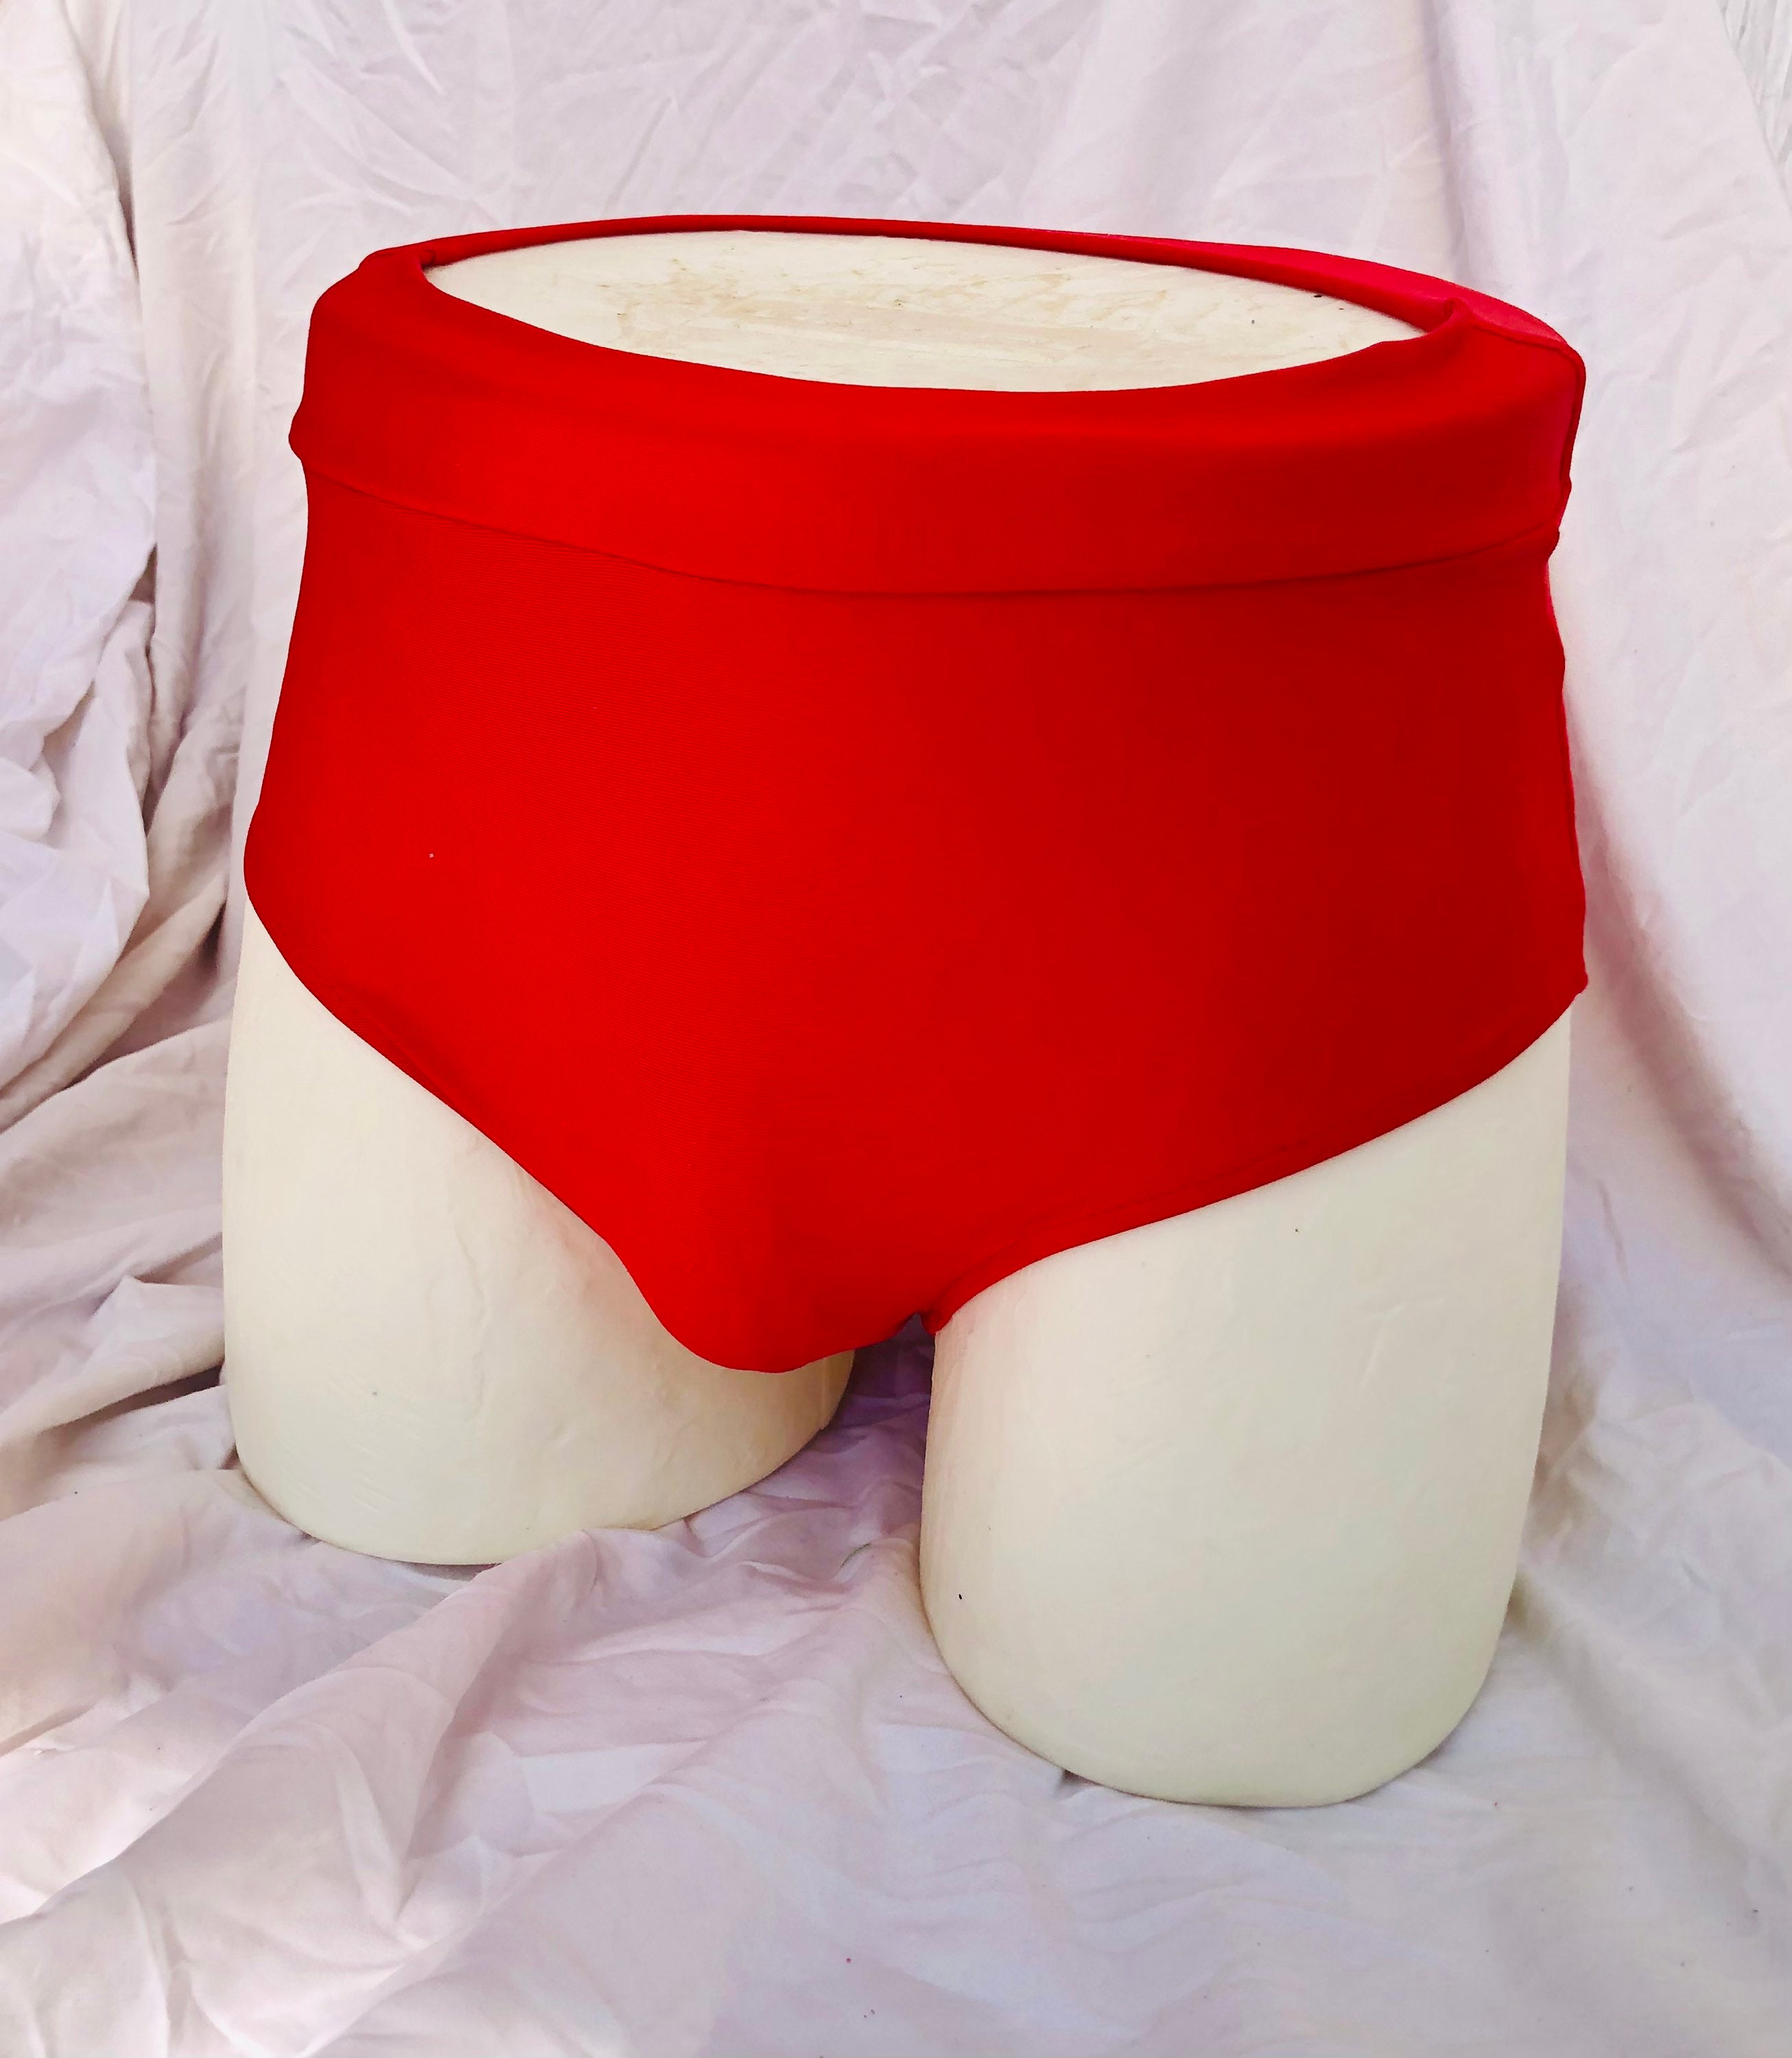 Mens Briefs in Many Colors and Styles. Handmade in USA 